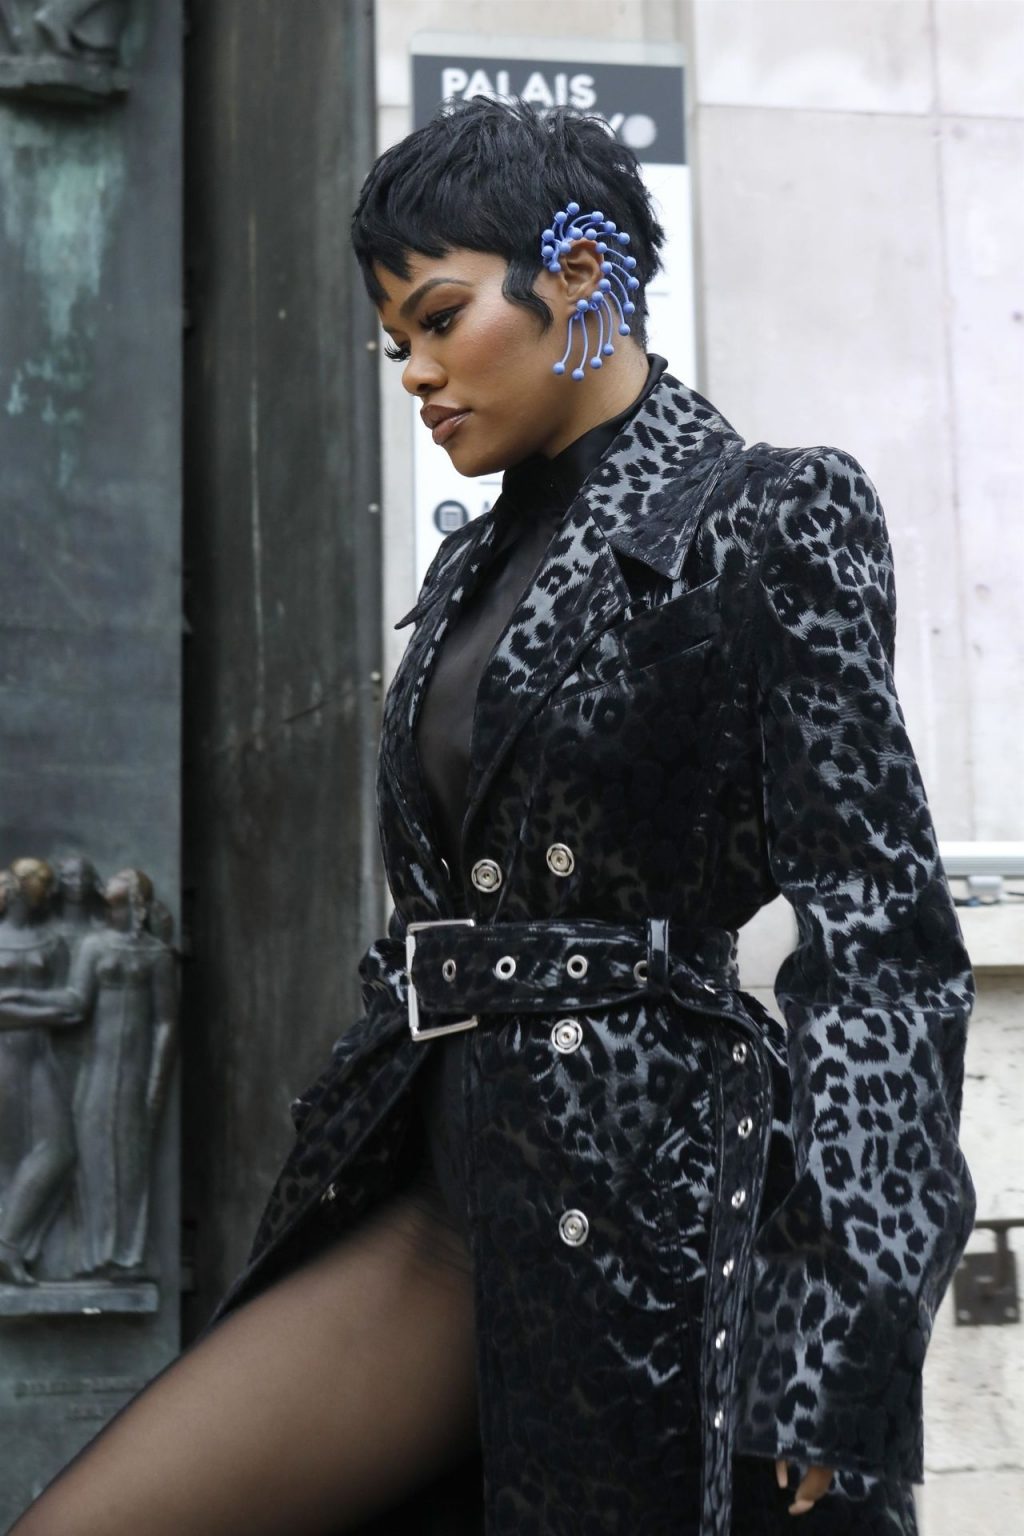 Teyana Taylor Pictured Attending the Mugler Show in Paris (13 Photos)